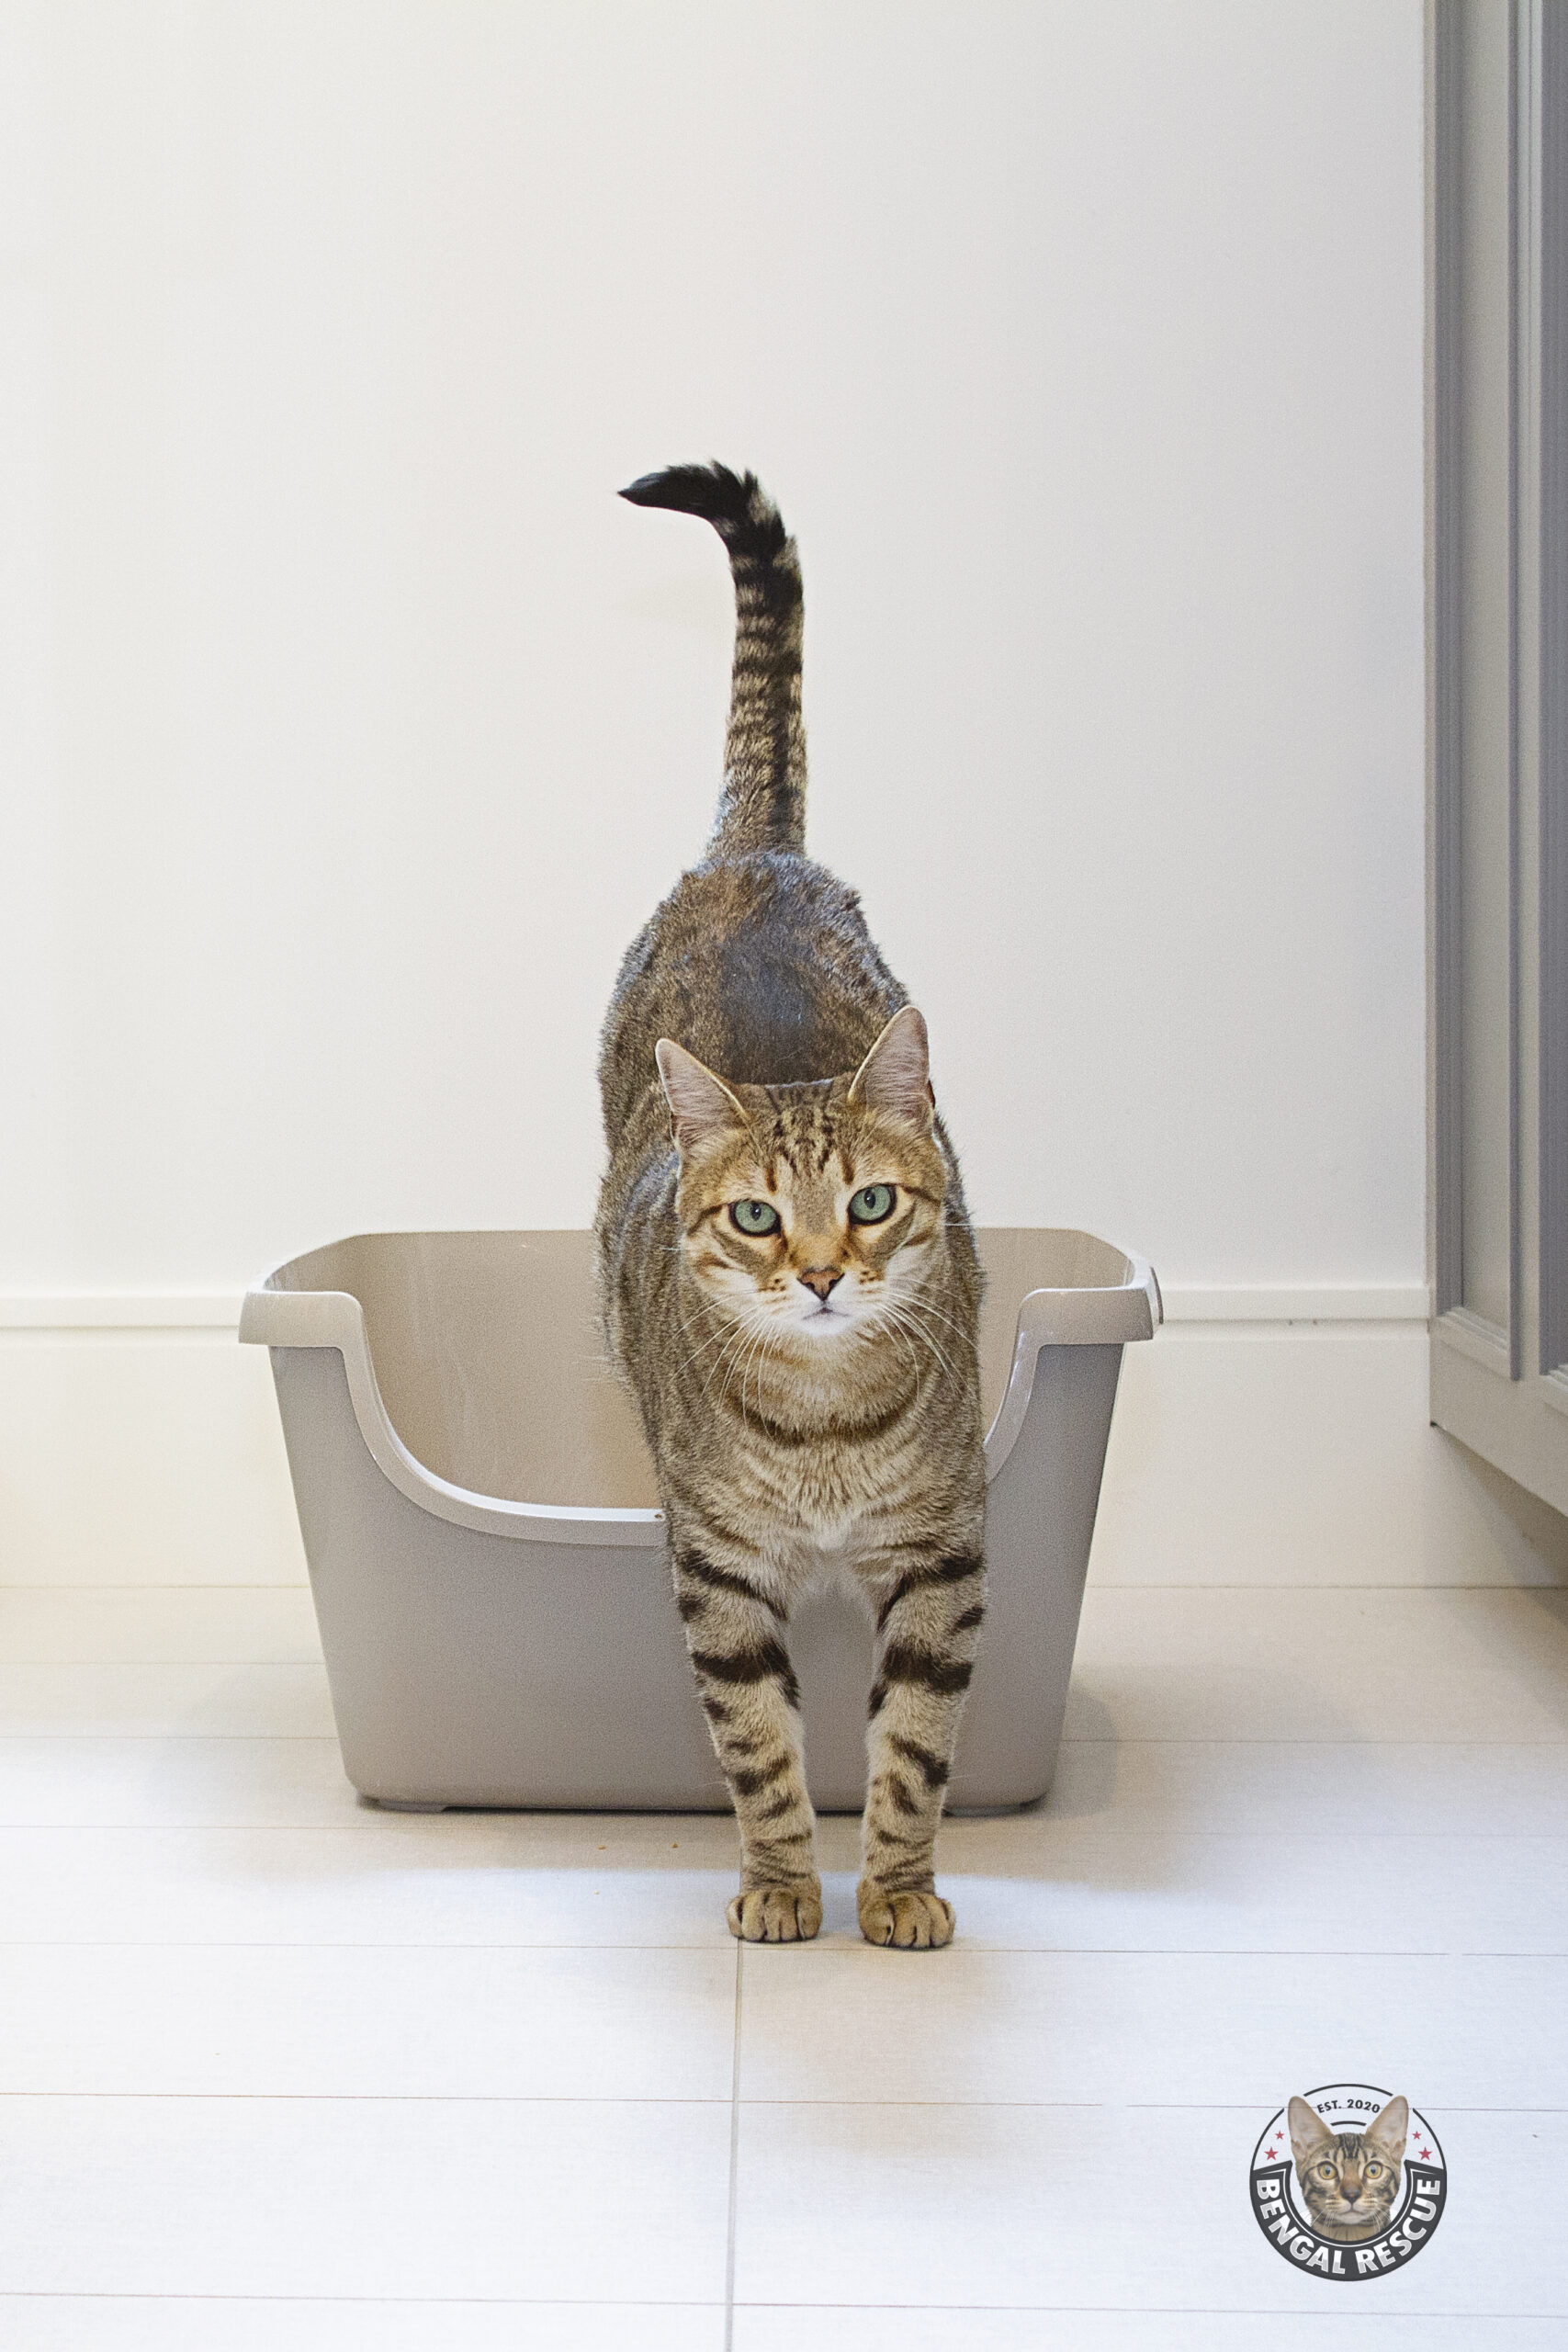 How to Set Up Your Cat's Litter Boxes to Prevent Potty Accidents